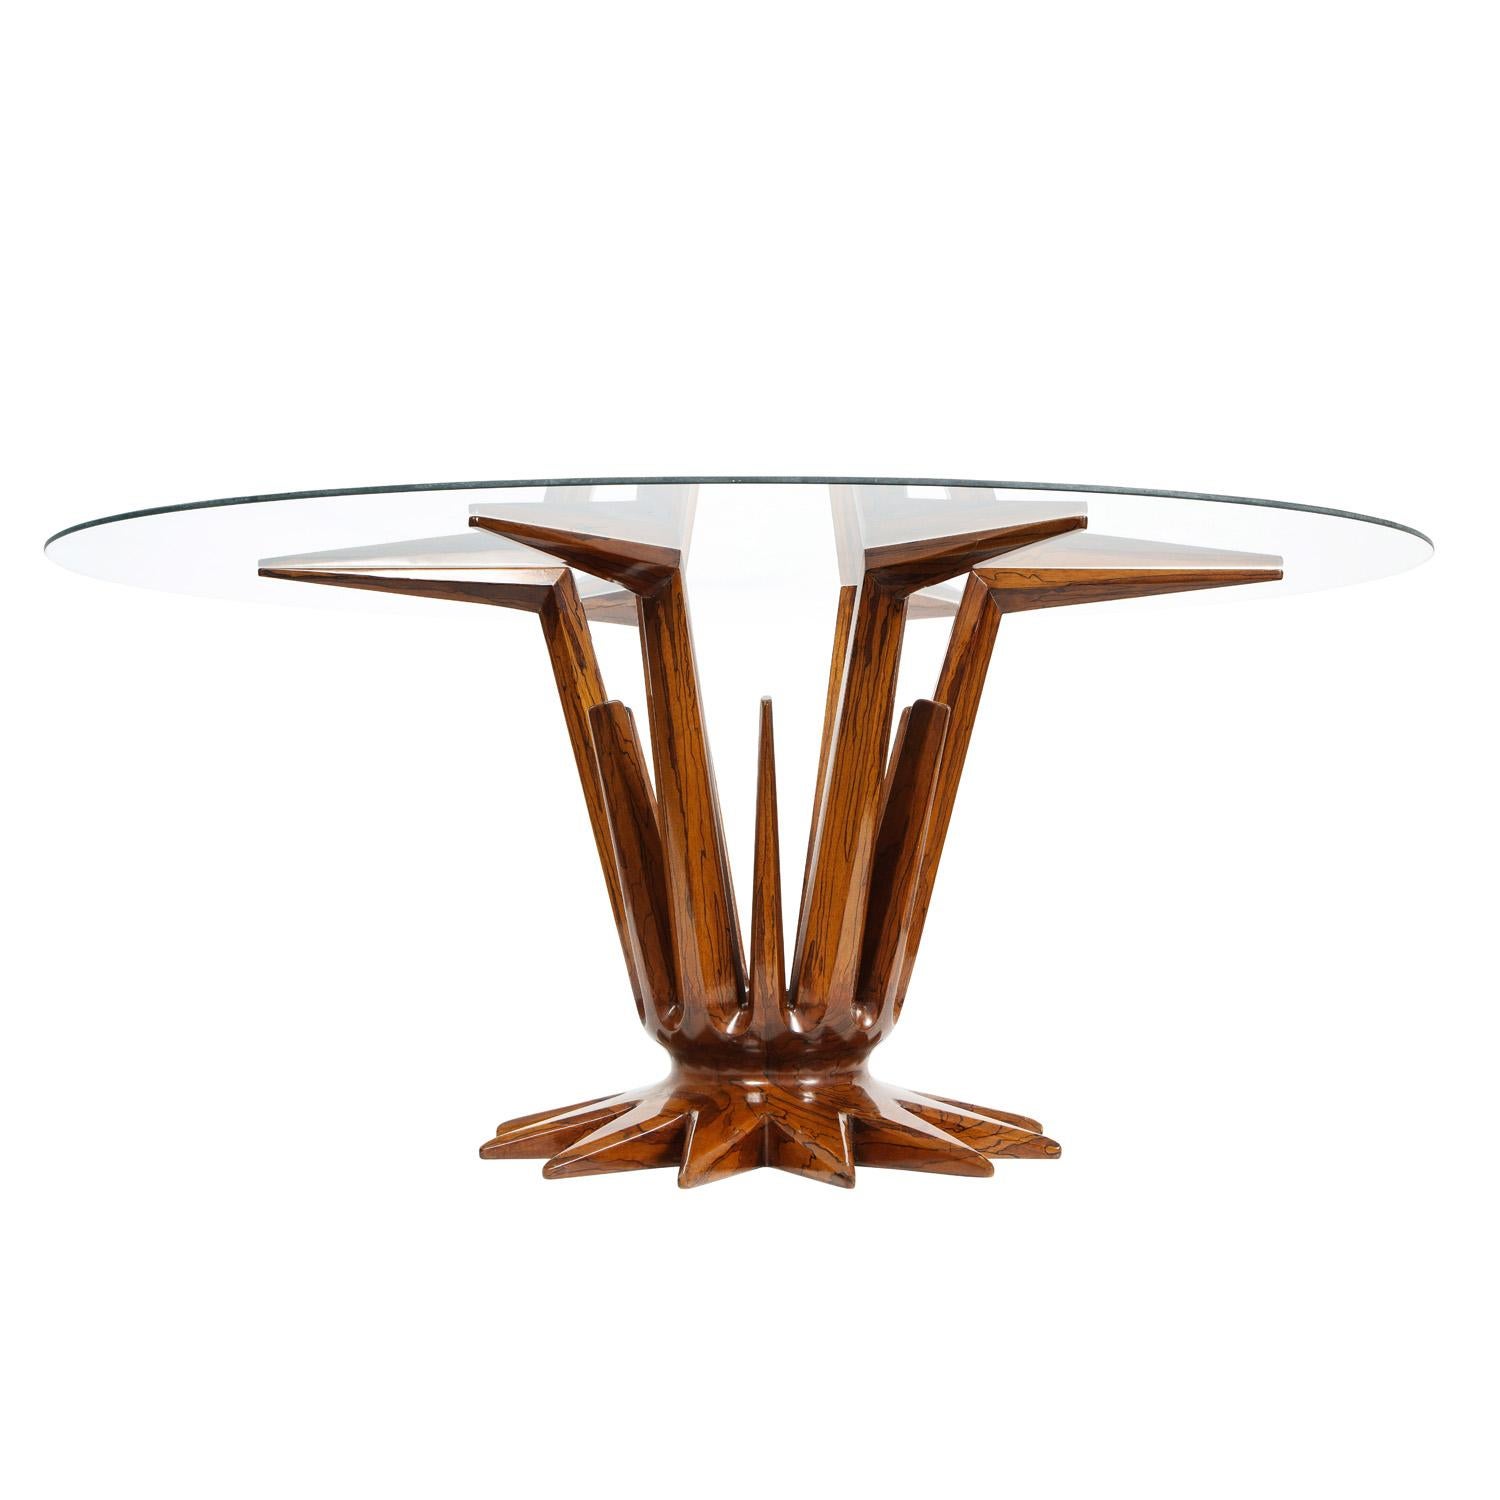 Mid-Century Modern Sculptural Rosewood and Glass Coffee Table, 1950s For Sale